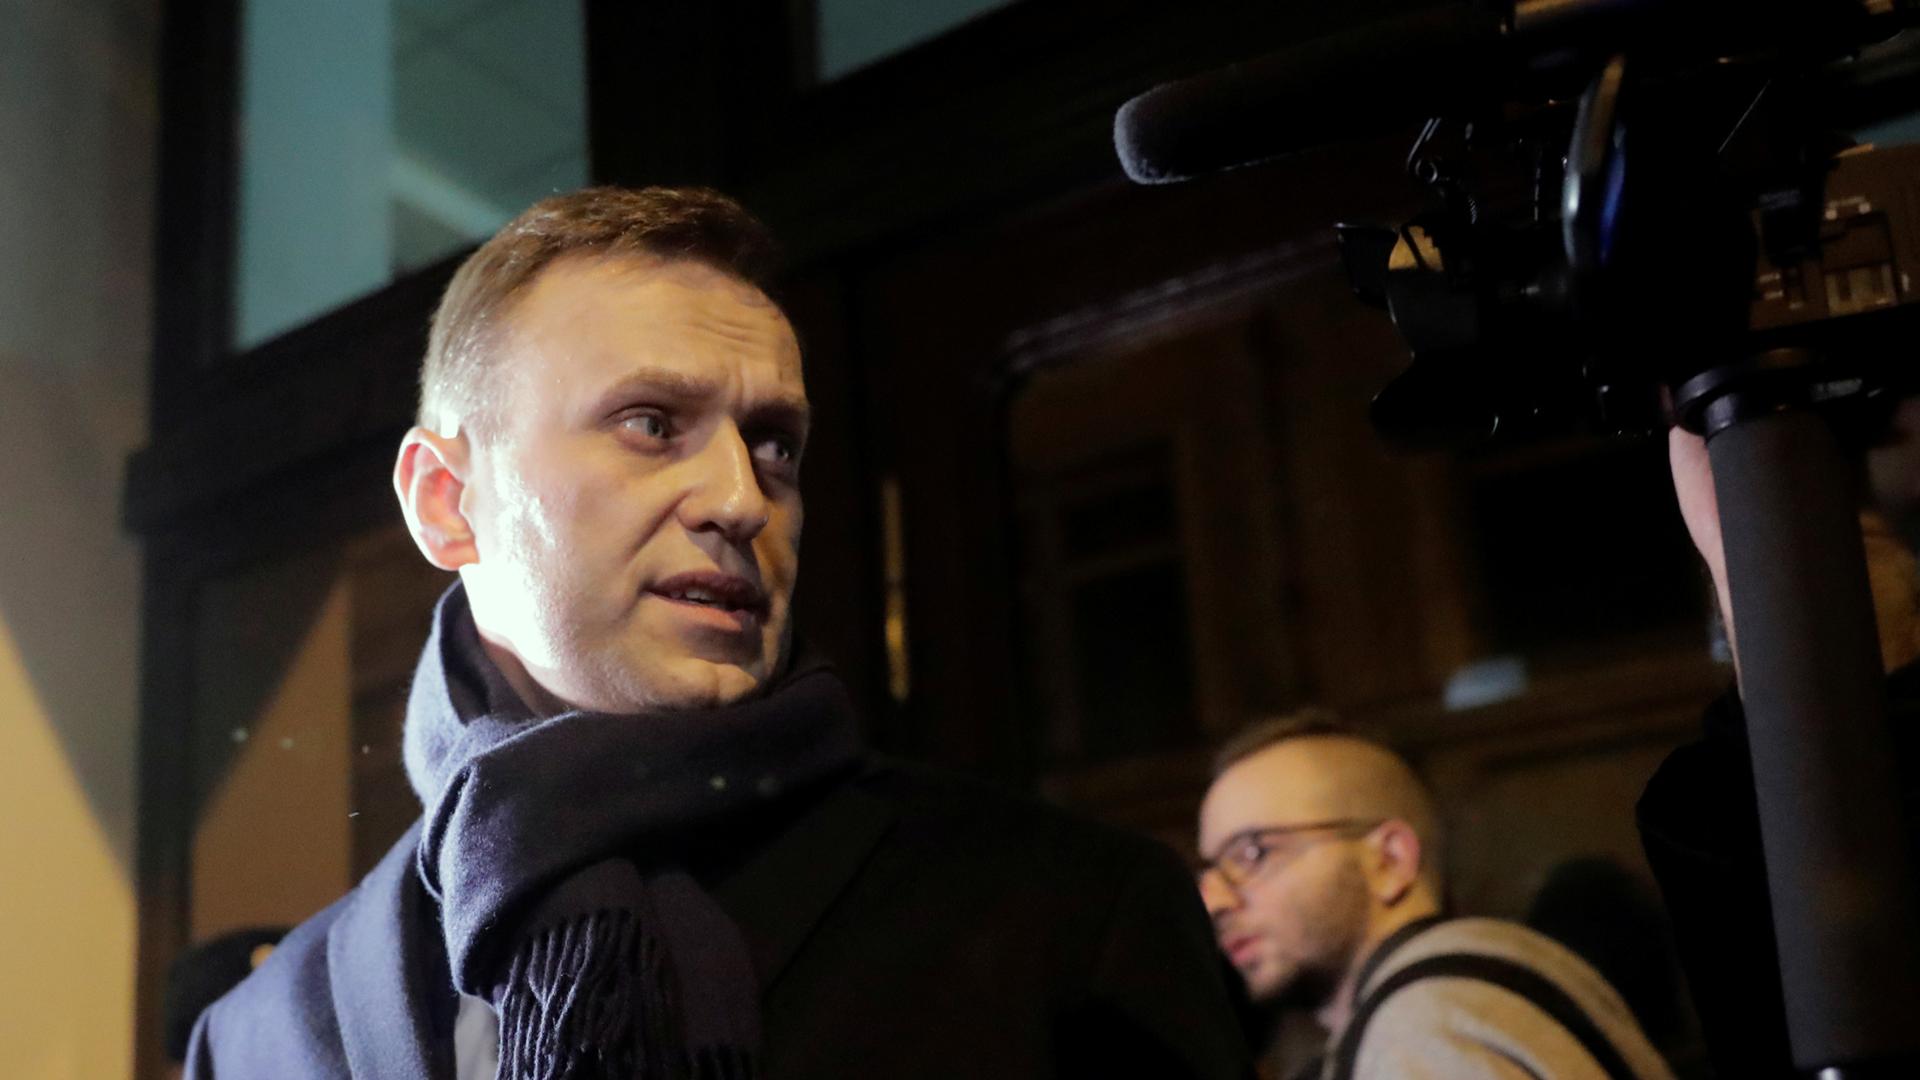 Russian opposition leader Alexei Navalny wearing a dark overcoat and scarf looks left toward a camera.